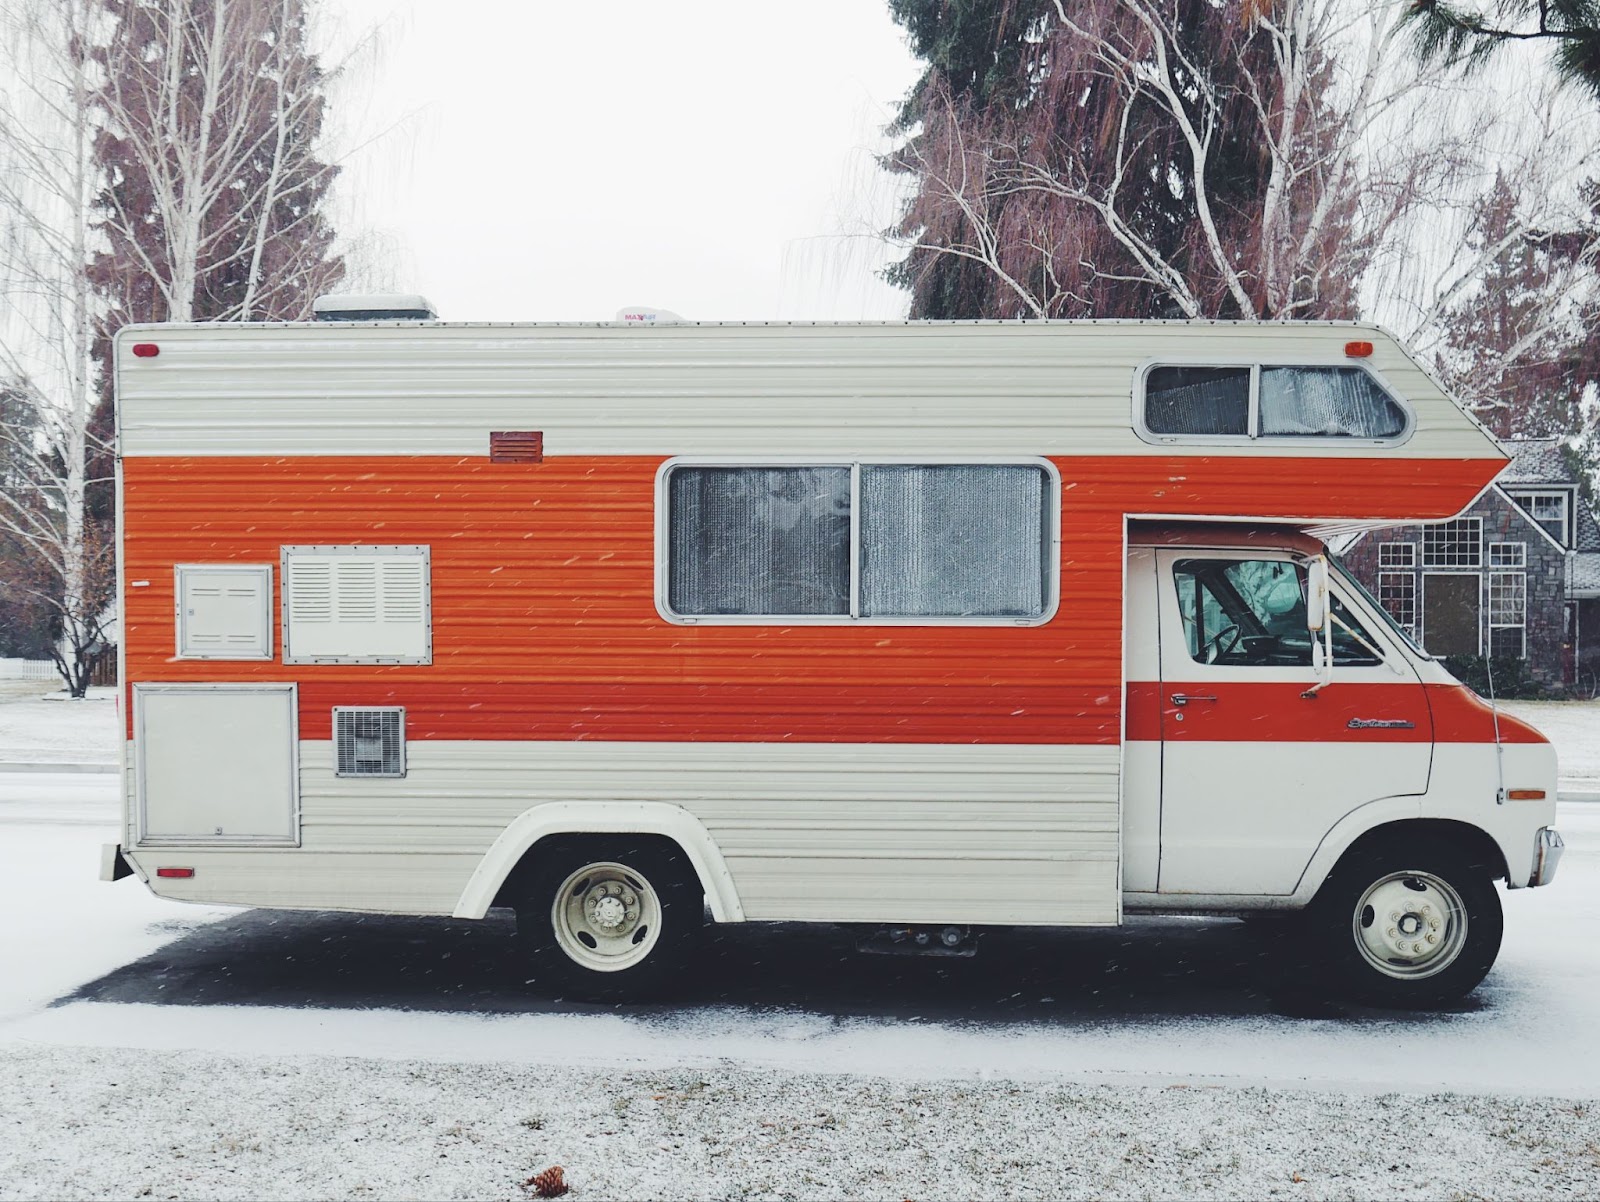 Many RVers store their RVs in northern states during the colder months (https://unsplash.com/photos/id7EXciI1fY)